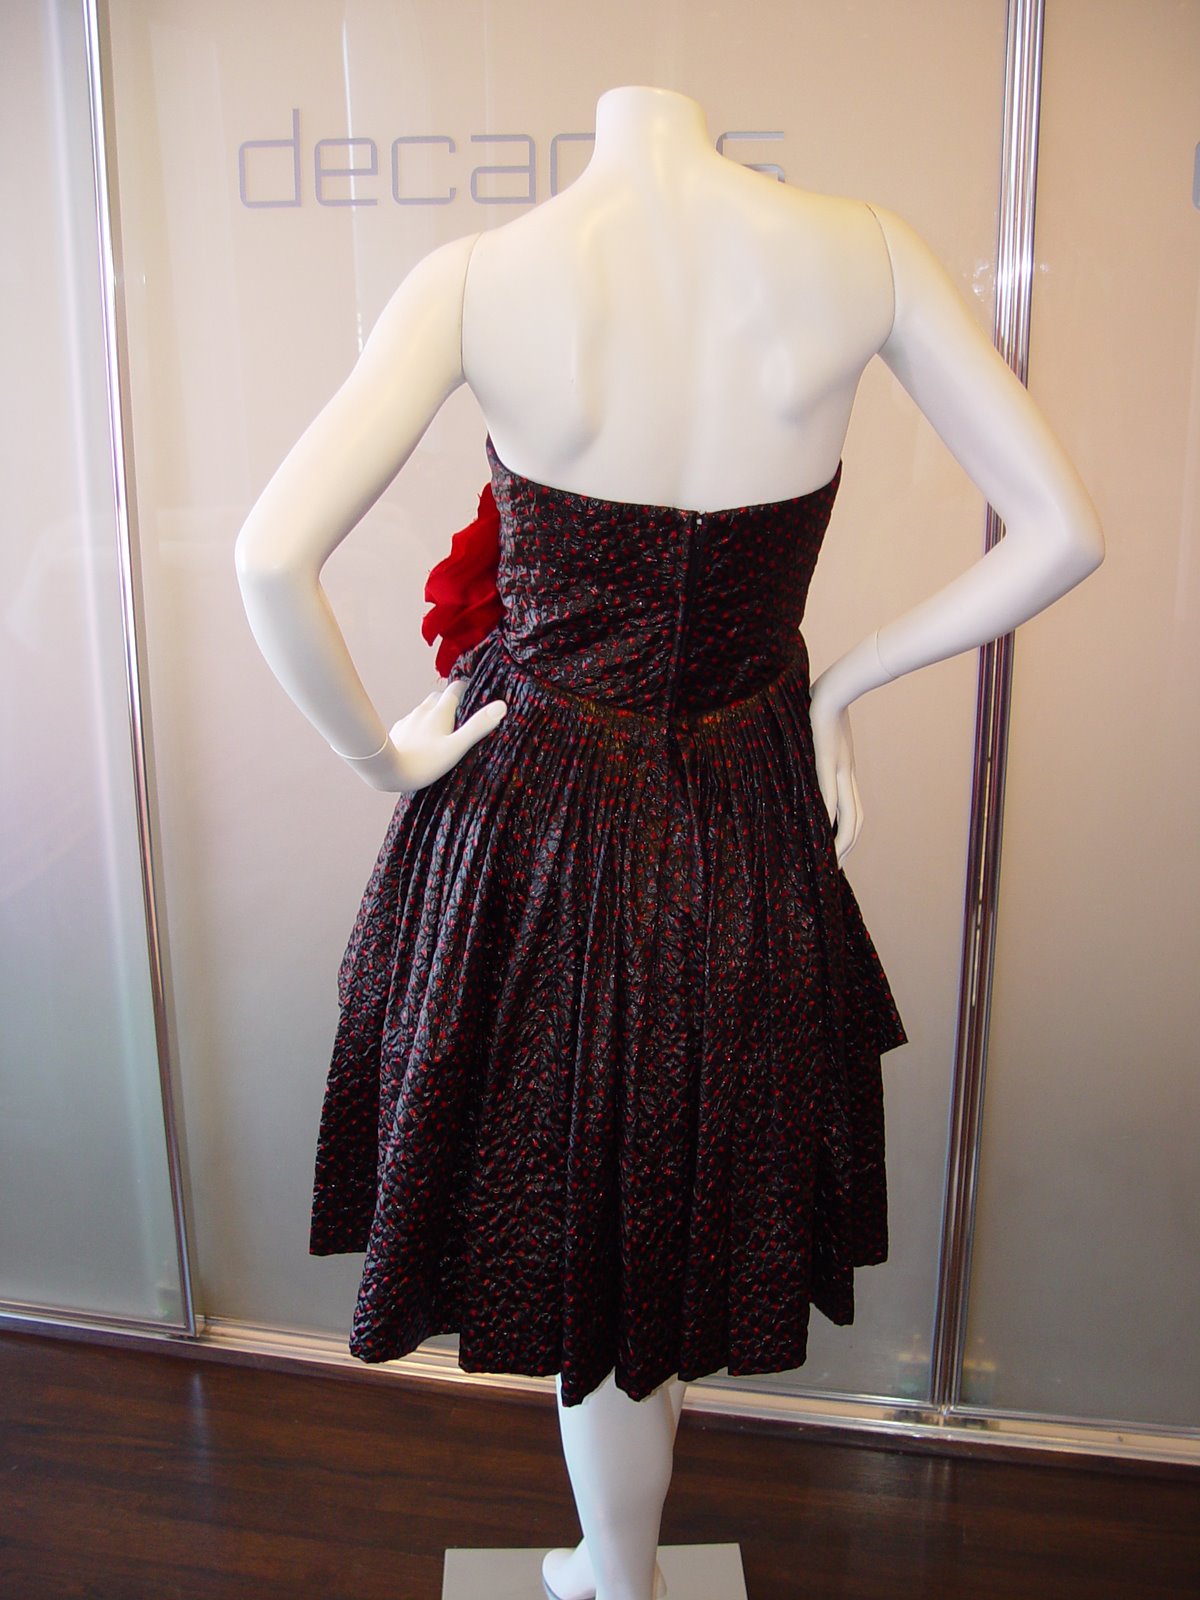 [JAMES+GALANOS+50S+STYLE+80S+ERA+BLACK+SHINY+QUILTED+FABRIC+WITH+RED+DOT+DRESS+WITH+BIG+RED+FLOWER+AT+WAIST+CONTEMPORARY+SIZE+4+-+6.JPG+(1).JPG]